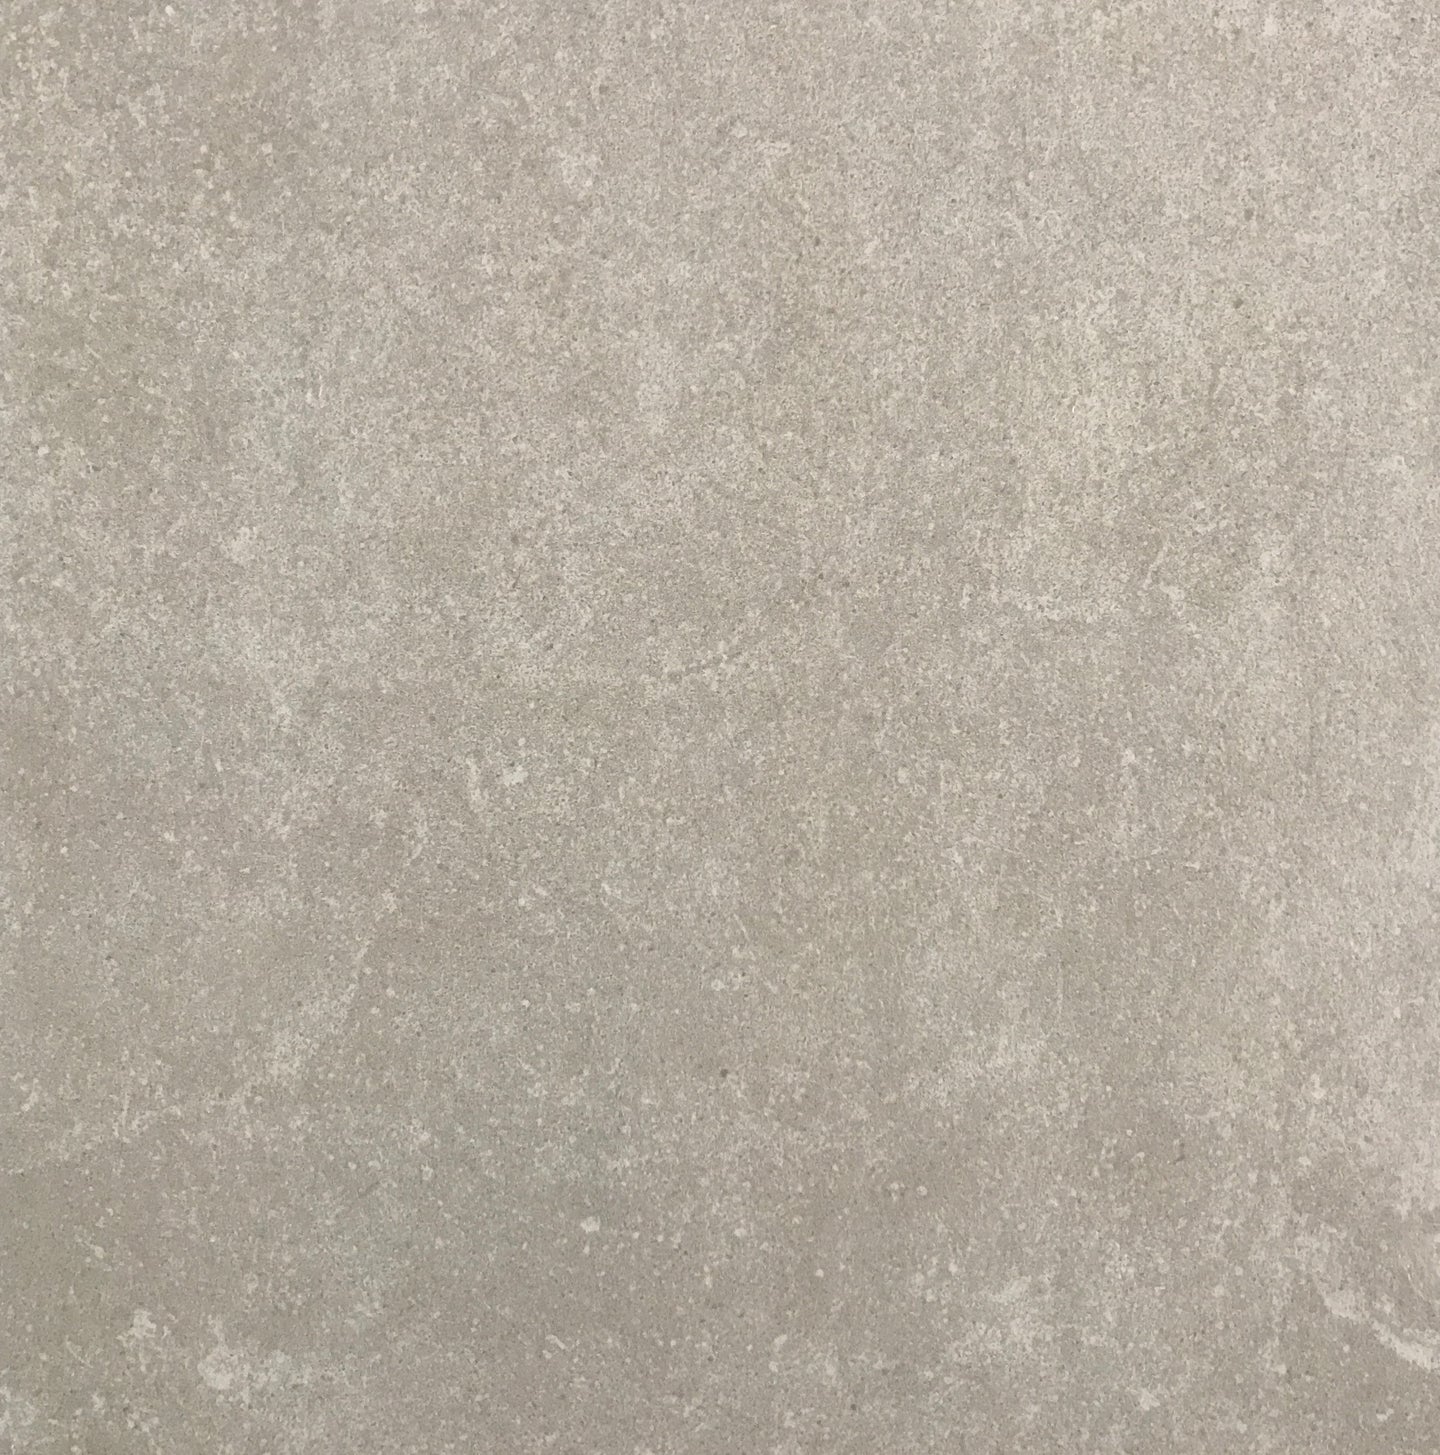 ABSTRACT TAUPE | Taupe Memories Rectified Glazed Porcelain. Tile Samples Sydney